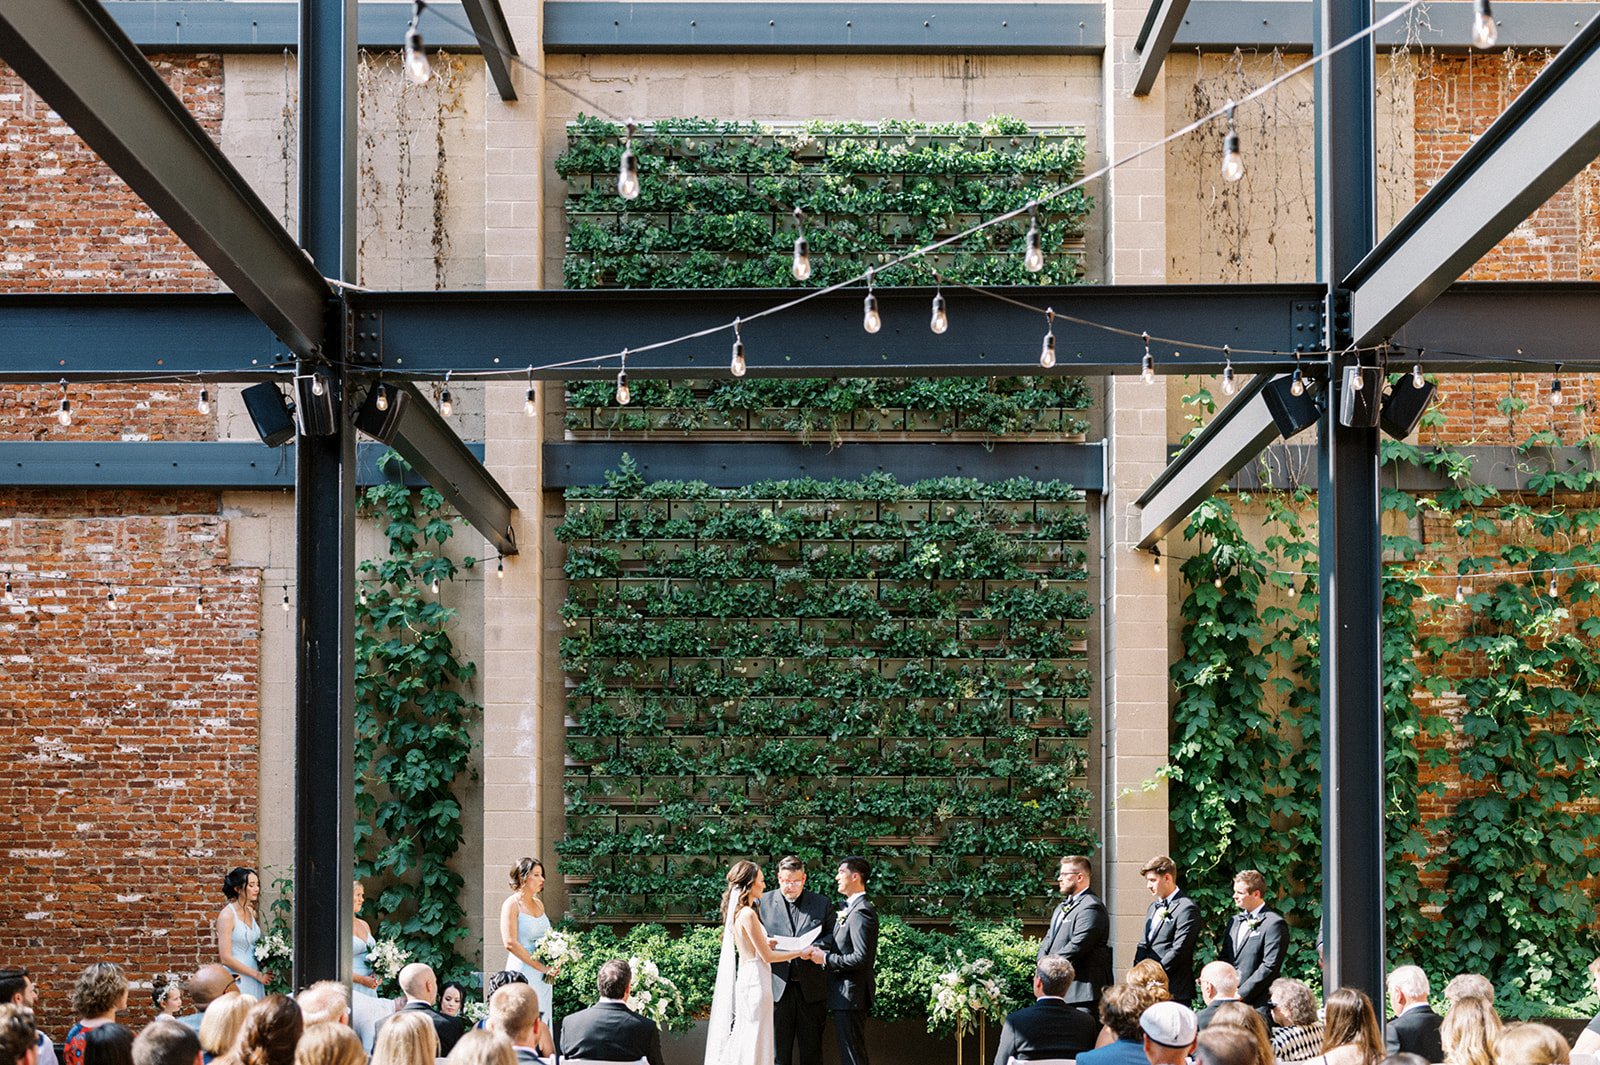 Wedding ceremony taking place in front of green succulent wall